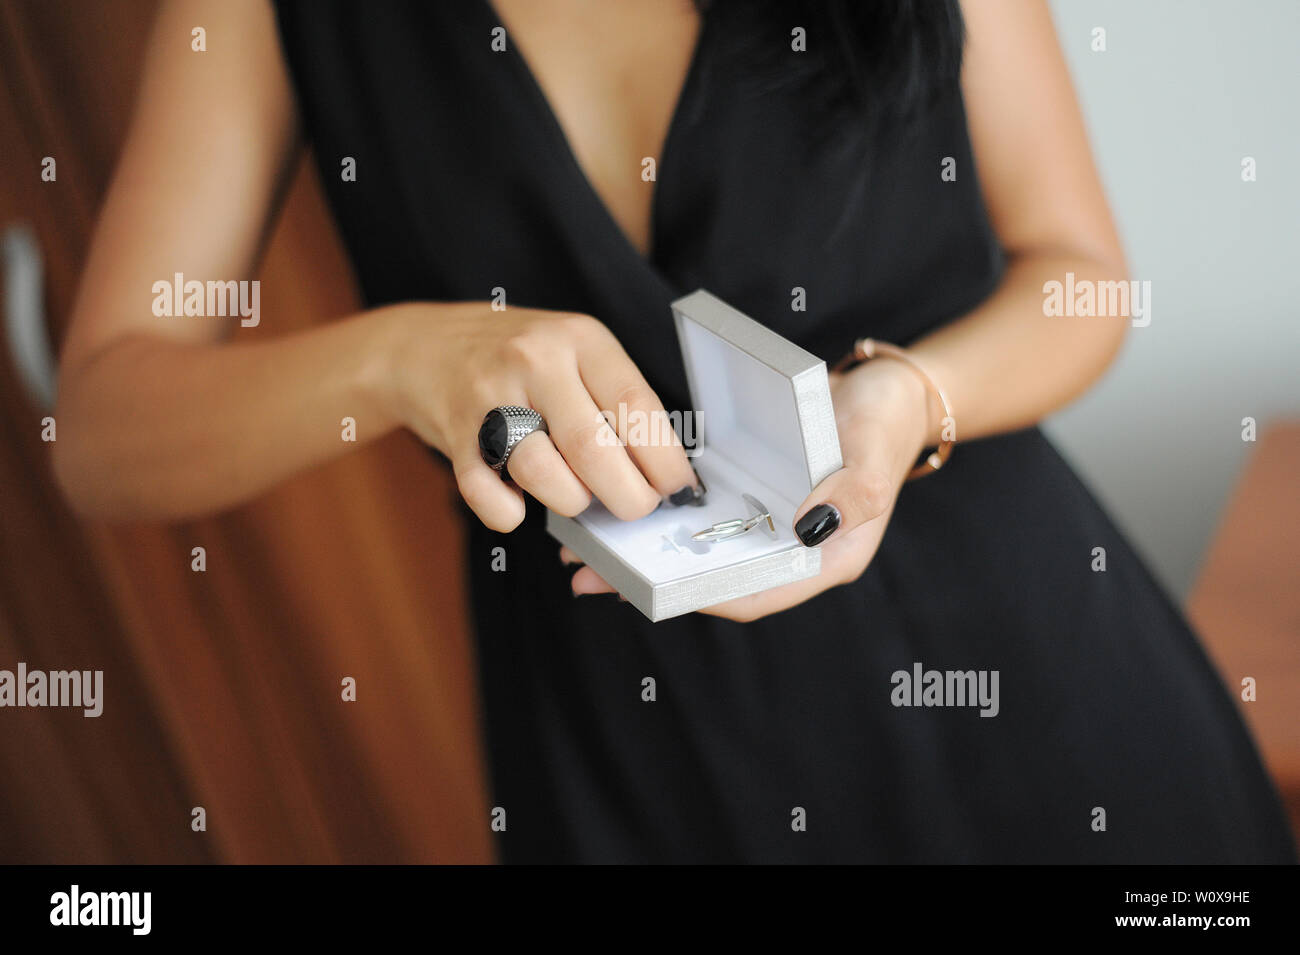 Caucasian woman dressed in an elegant black dress with a black chunky ring and black manicure, holding a small jewelry box with a pair of cuff links Stock Photo